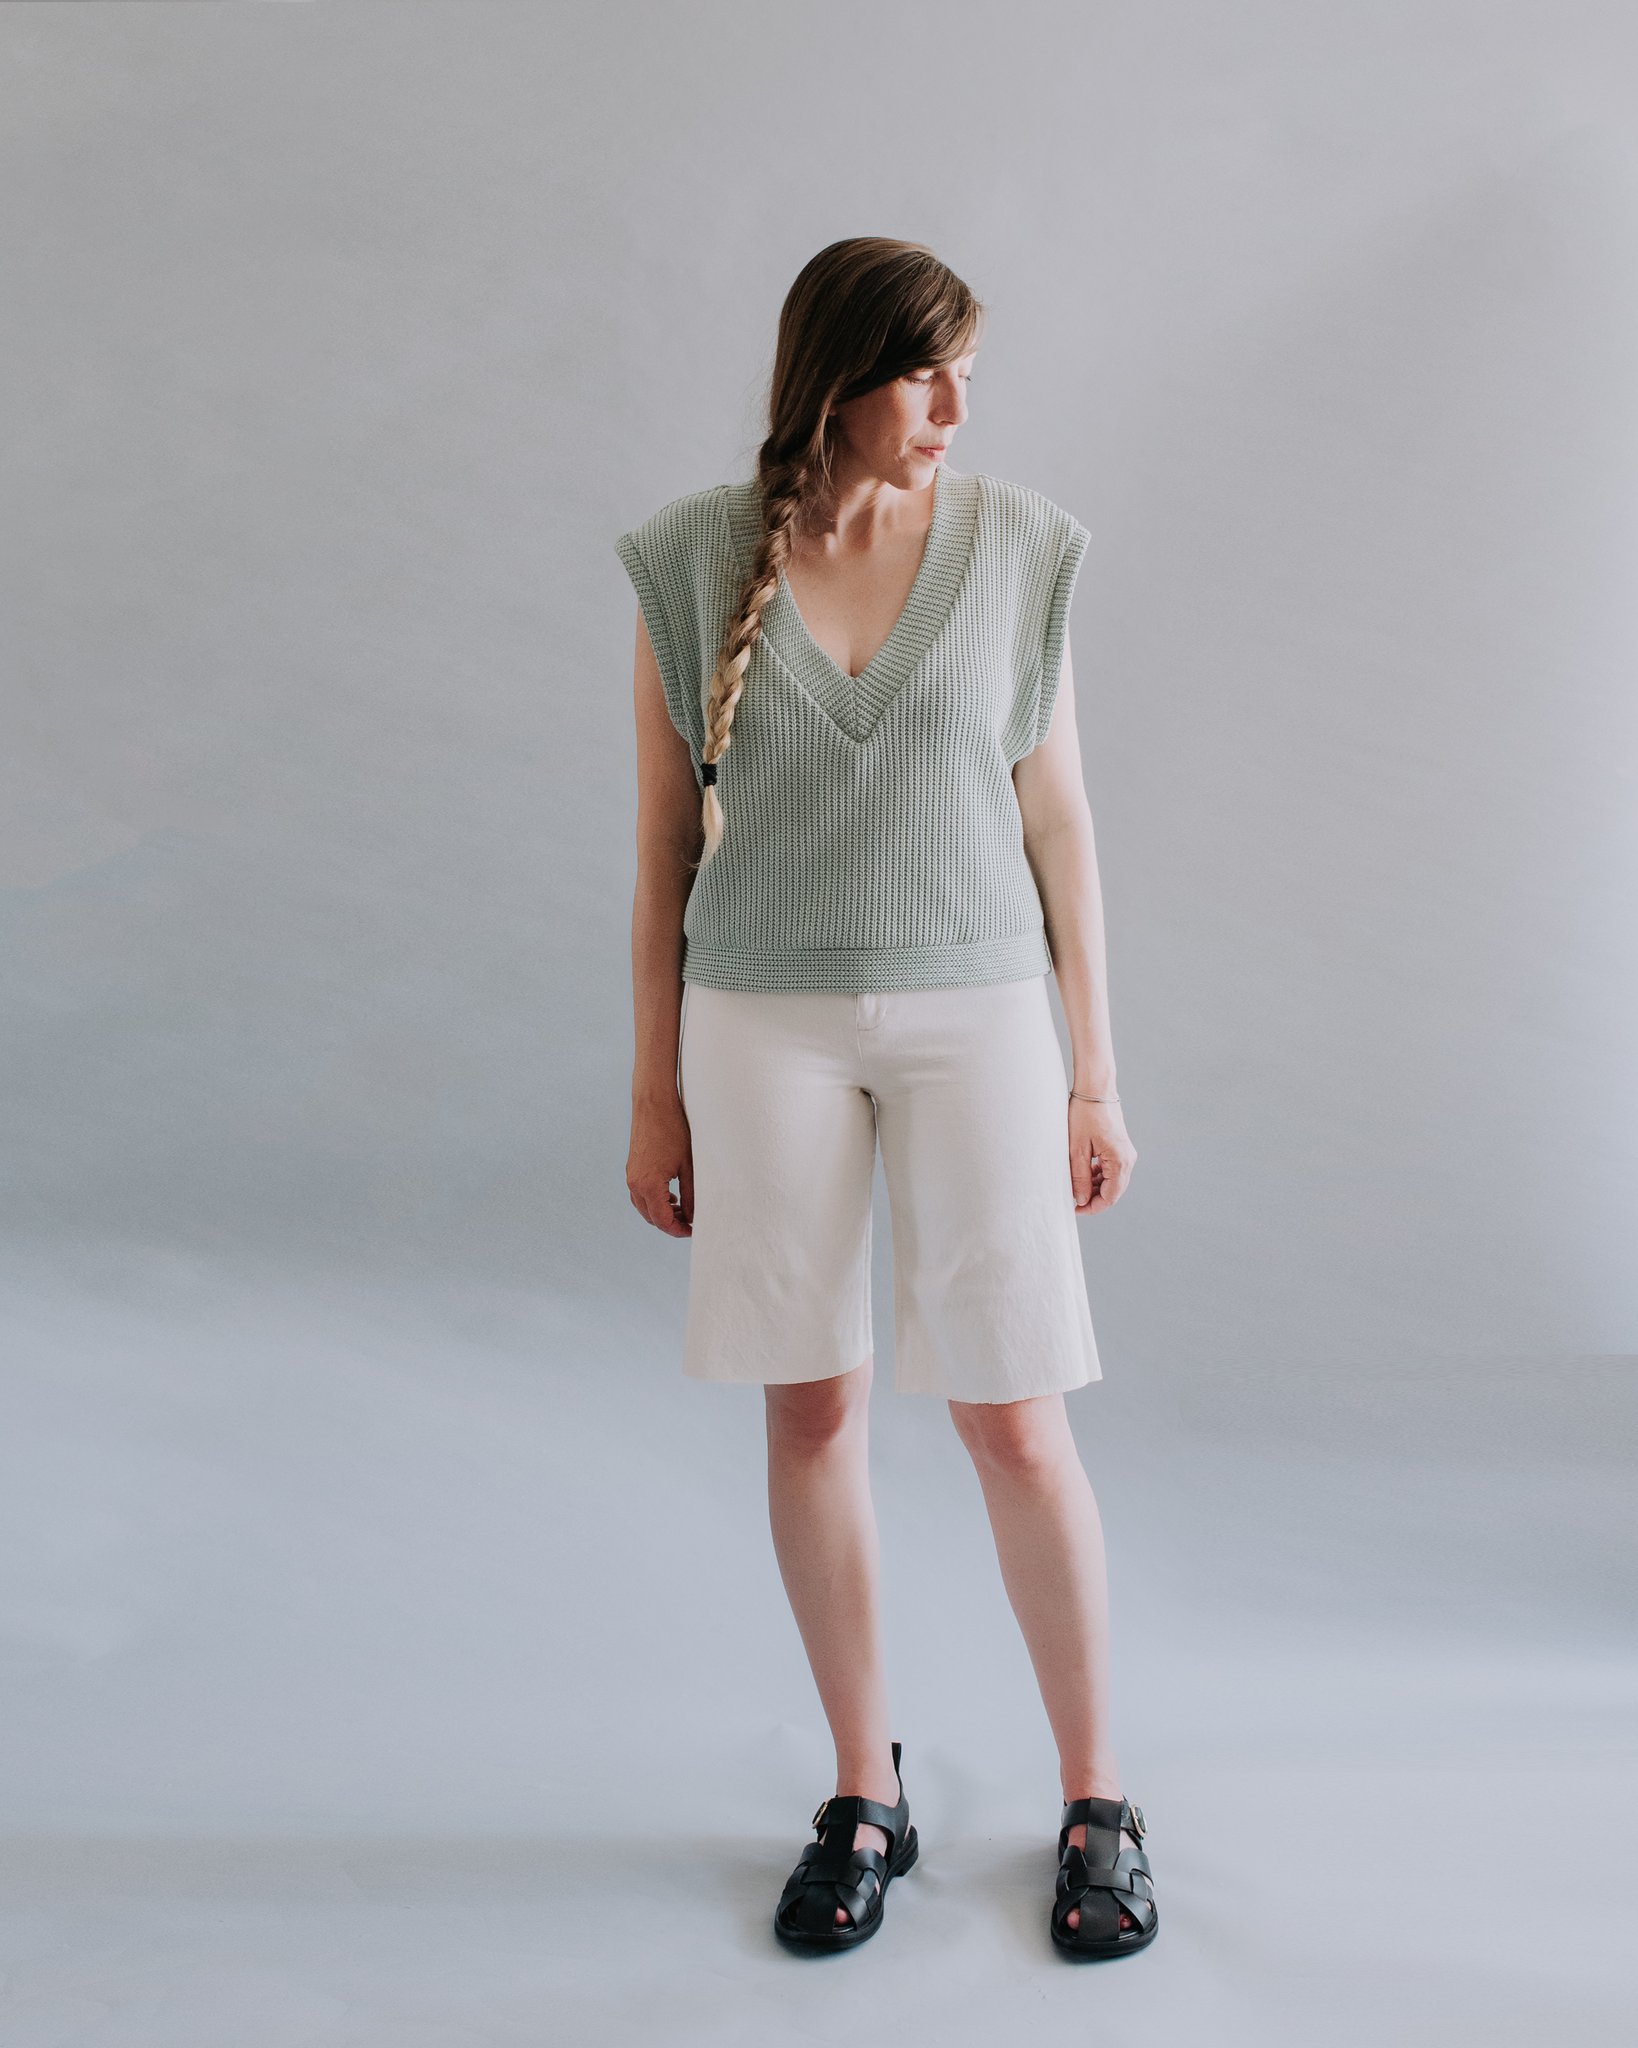 Woman wearing the Pierce Vest sewing pattern from Ensemble on The Fold Line. A sleeveless top pattern made in cotton jersey, linen jersey, sweatshirt fleece, scuba knit, double knit, sweater knit or French terry fabrics, featuring a loose fit, deep V-neck, oversized armholes, and ribbed neck, arm and waist bands.